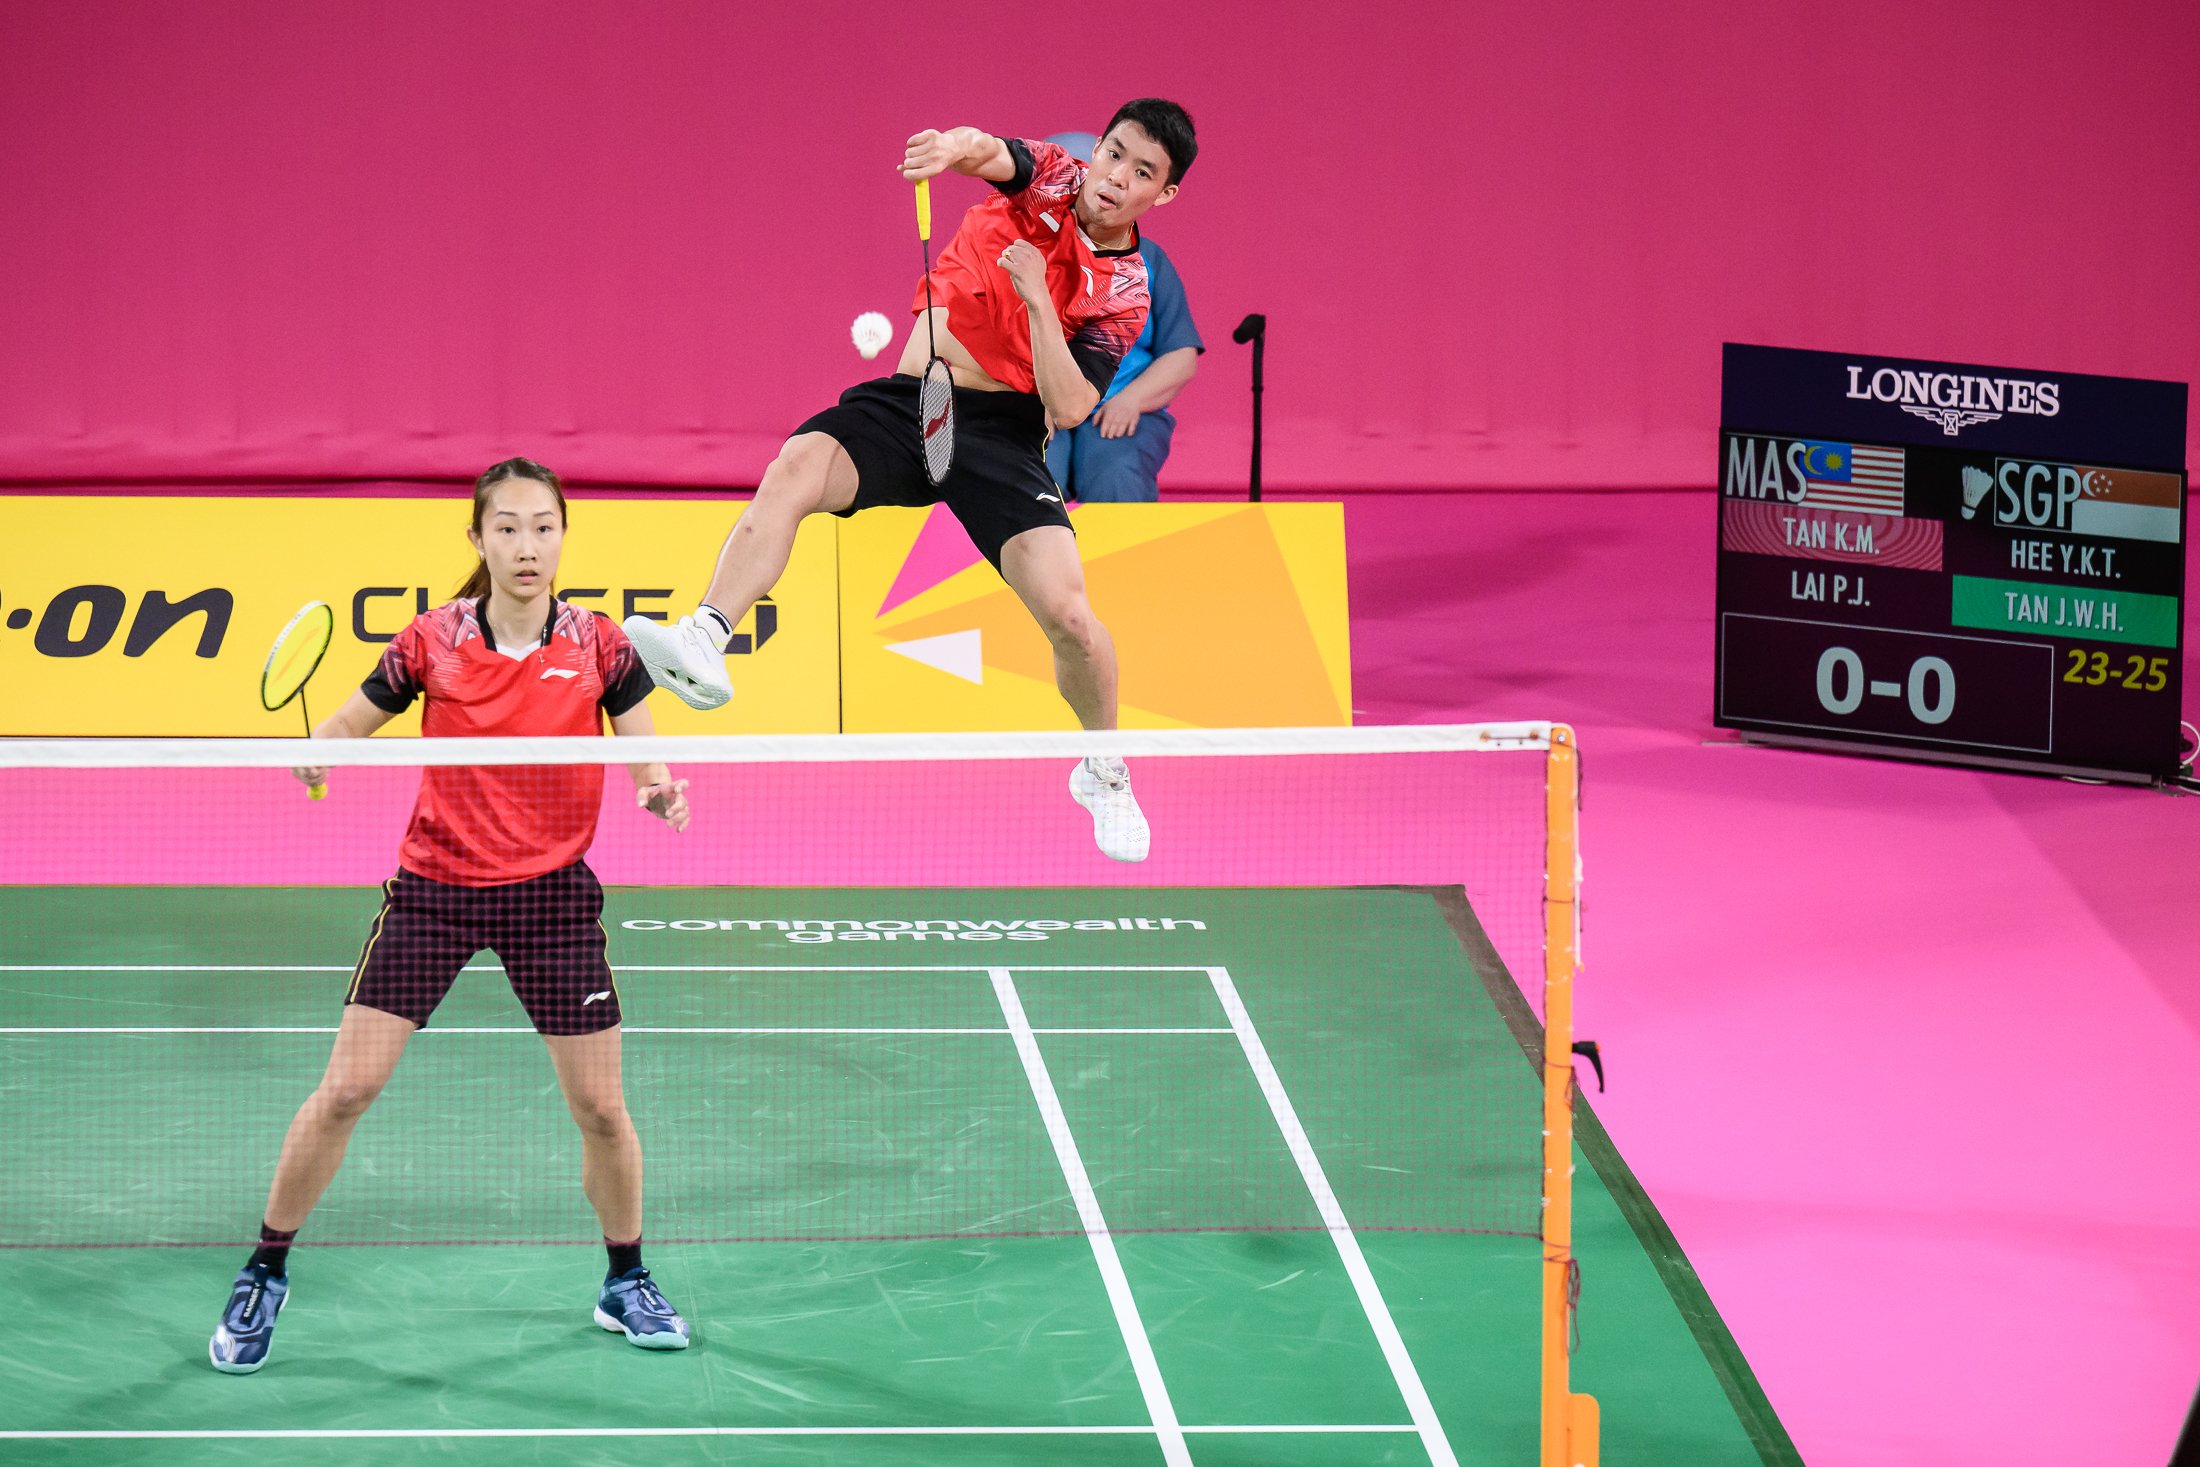 20220807_-_Badminton Photo by Andy Chua_005